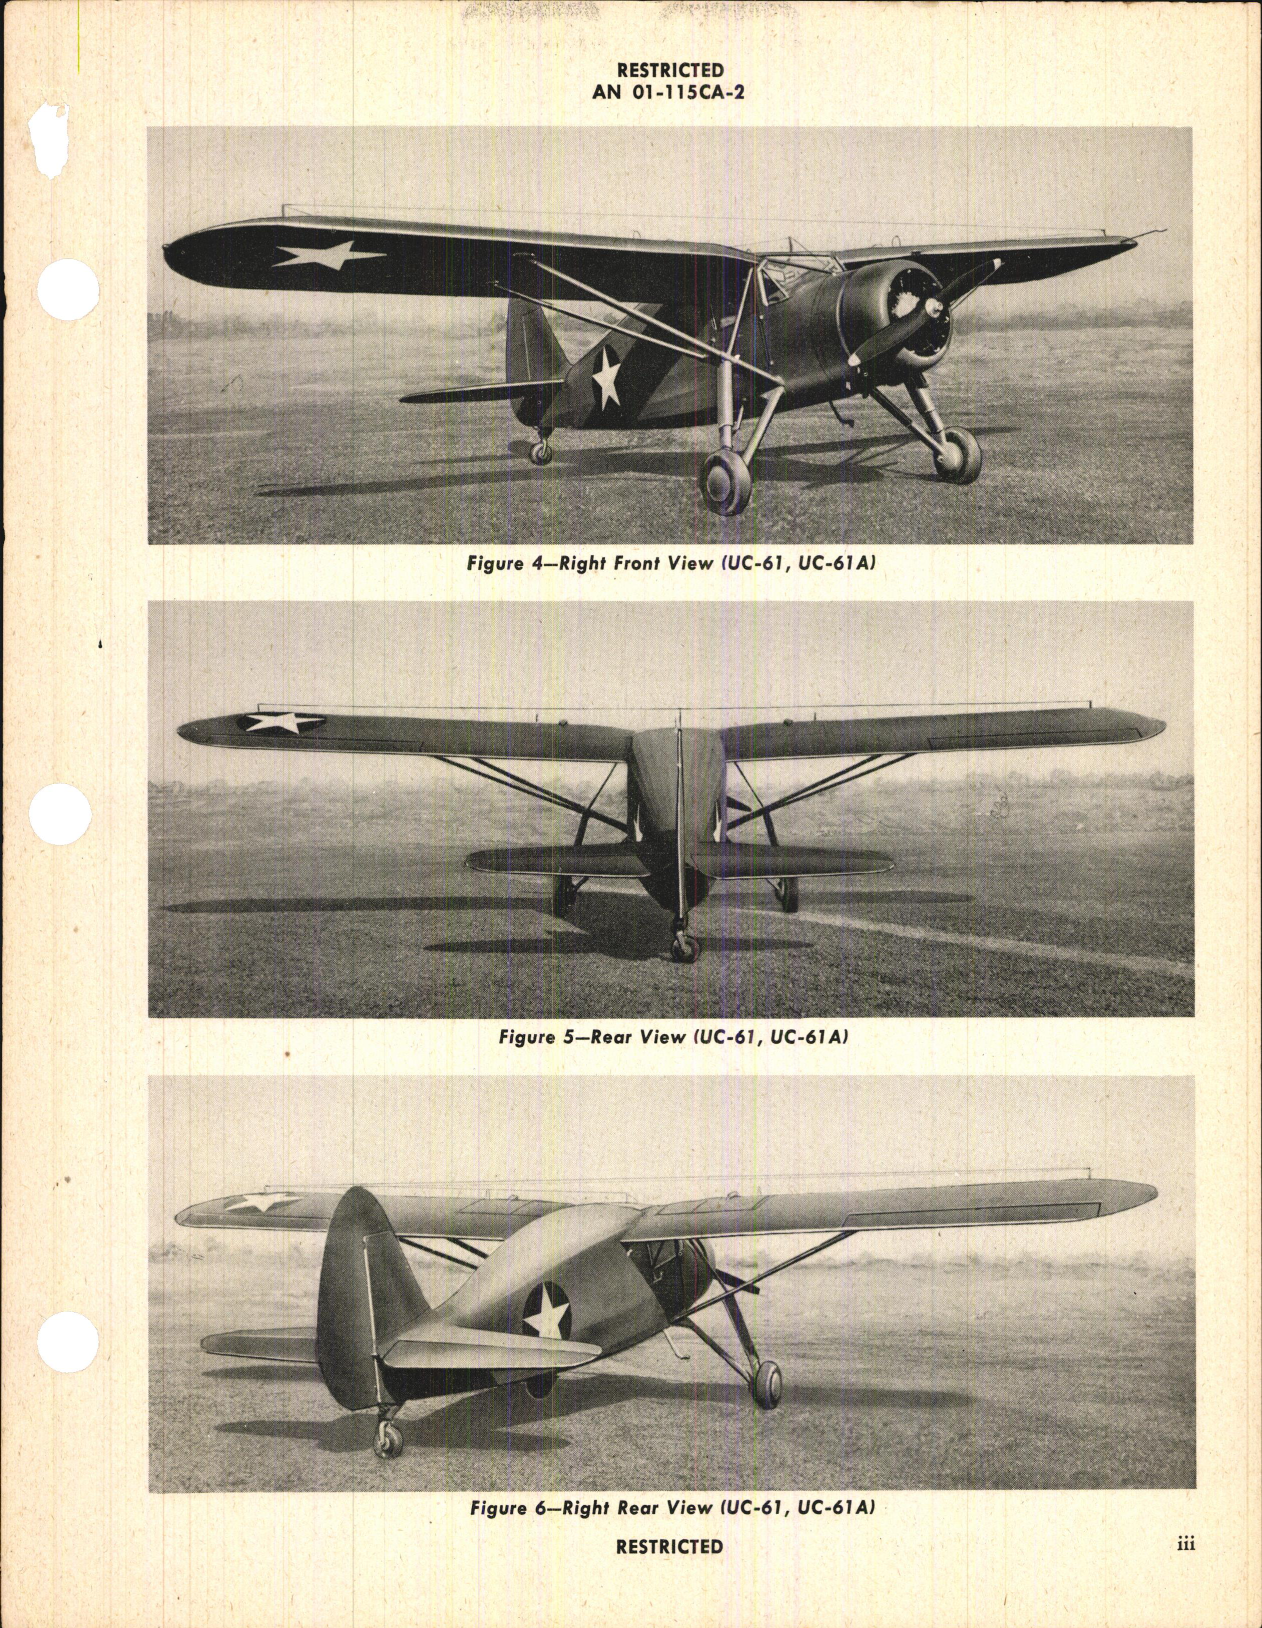 Sample page 5 from AirCorps Library document: Erection and Maintenance Instructions for UC-61, UC-61A, UC-61K, GK-1